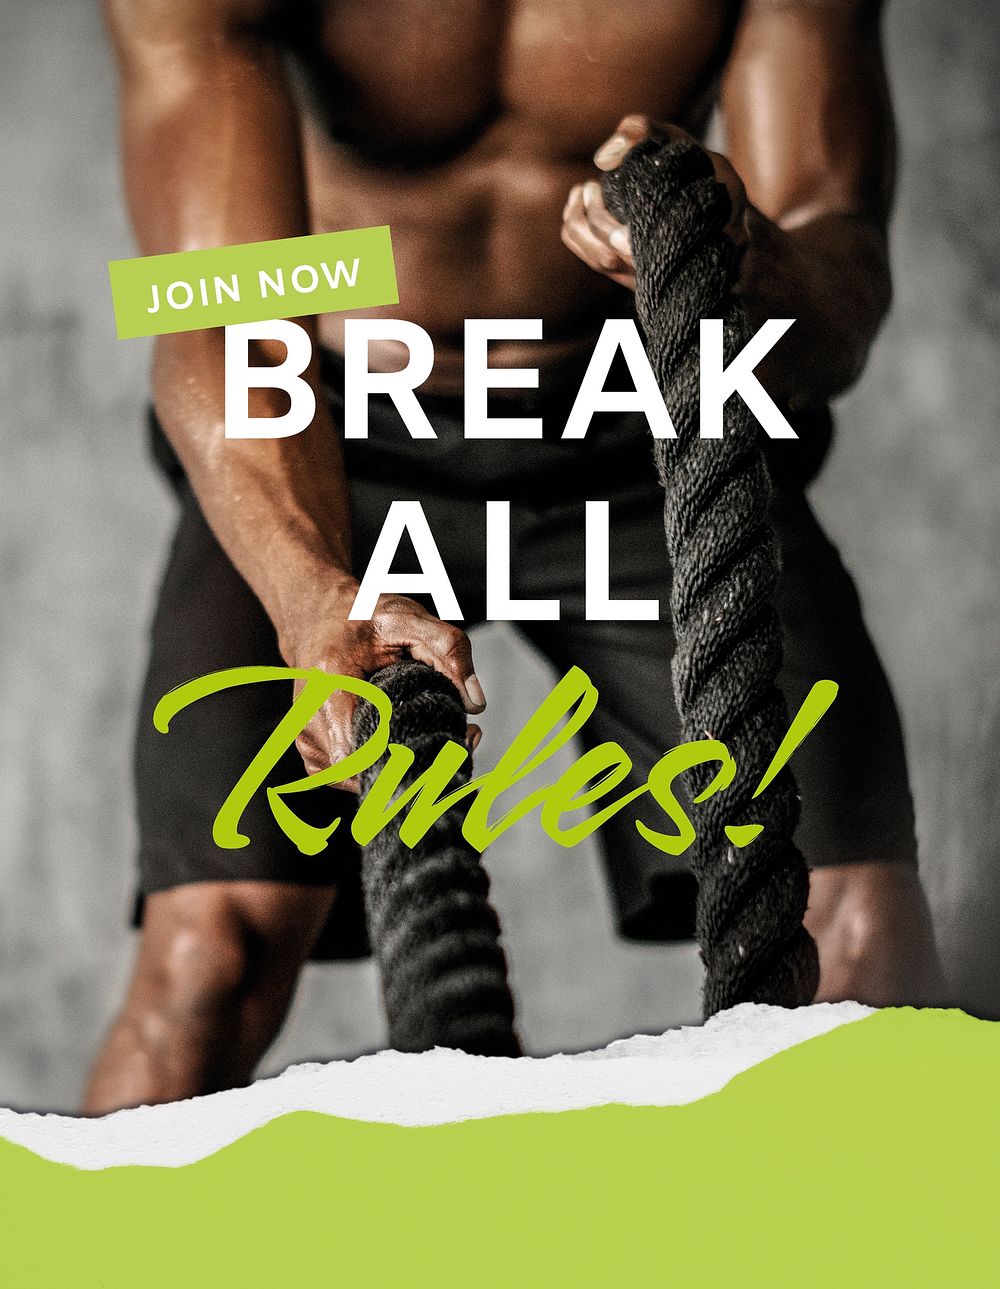 Gym ad flyer template, break all rules quote psd